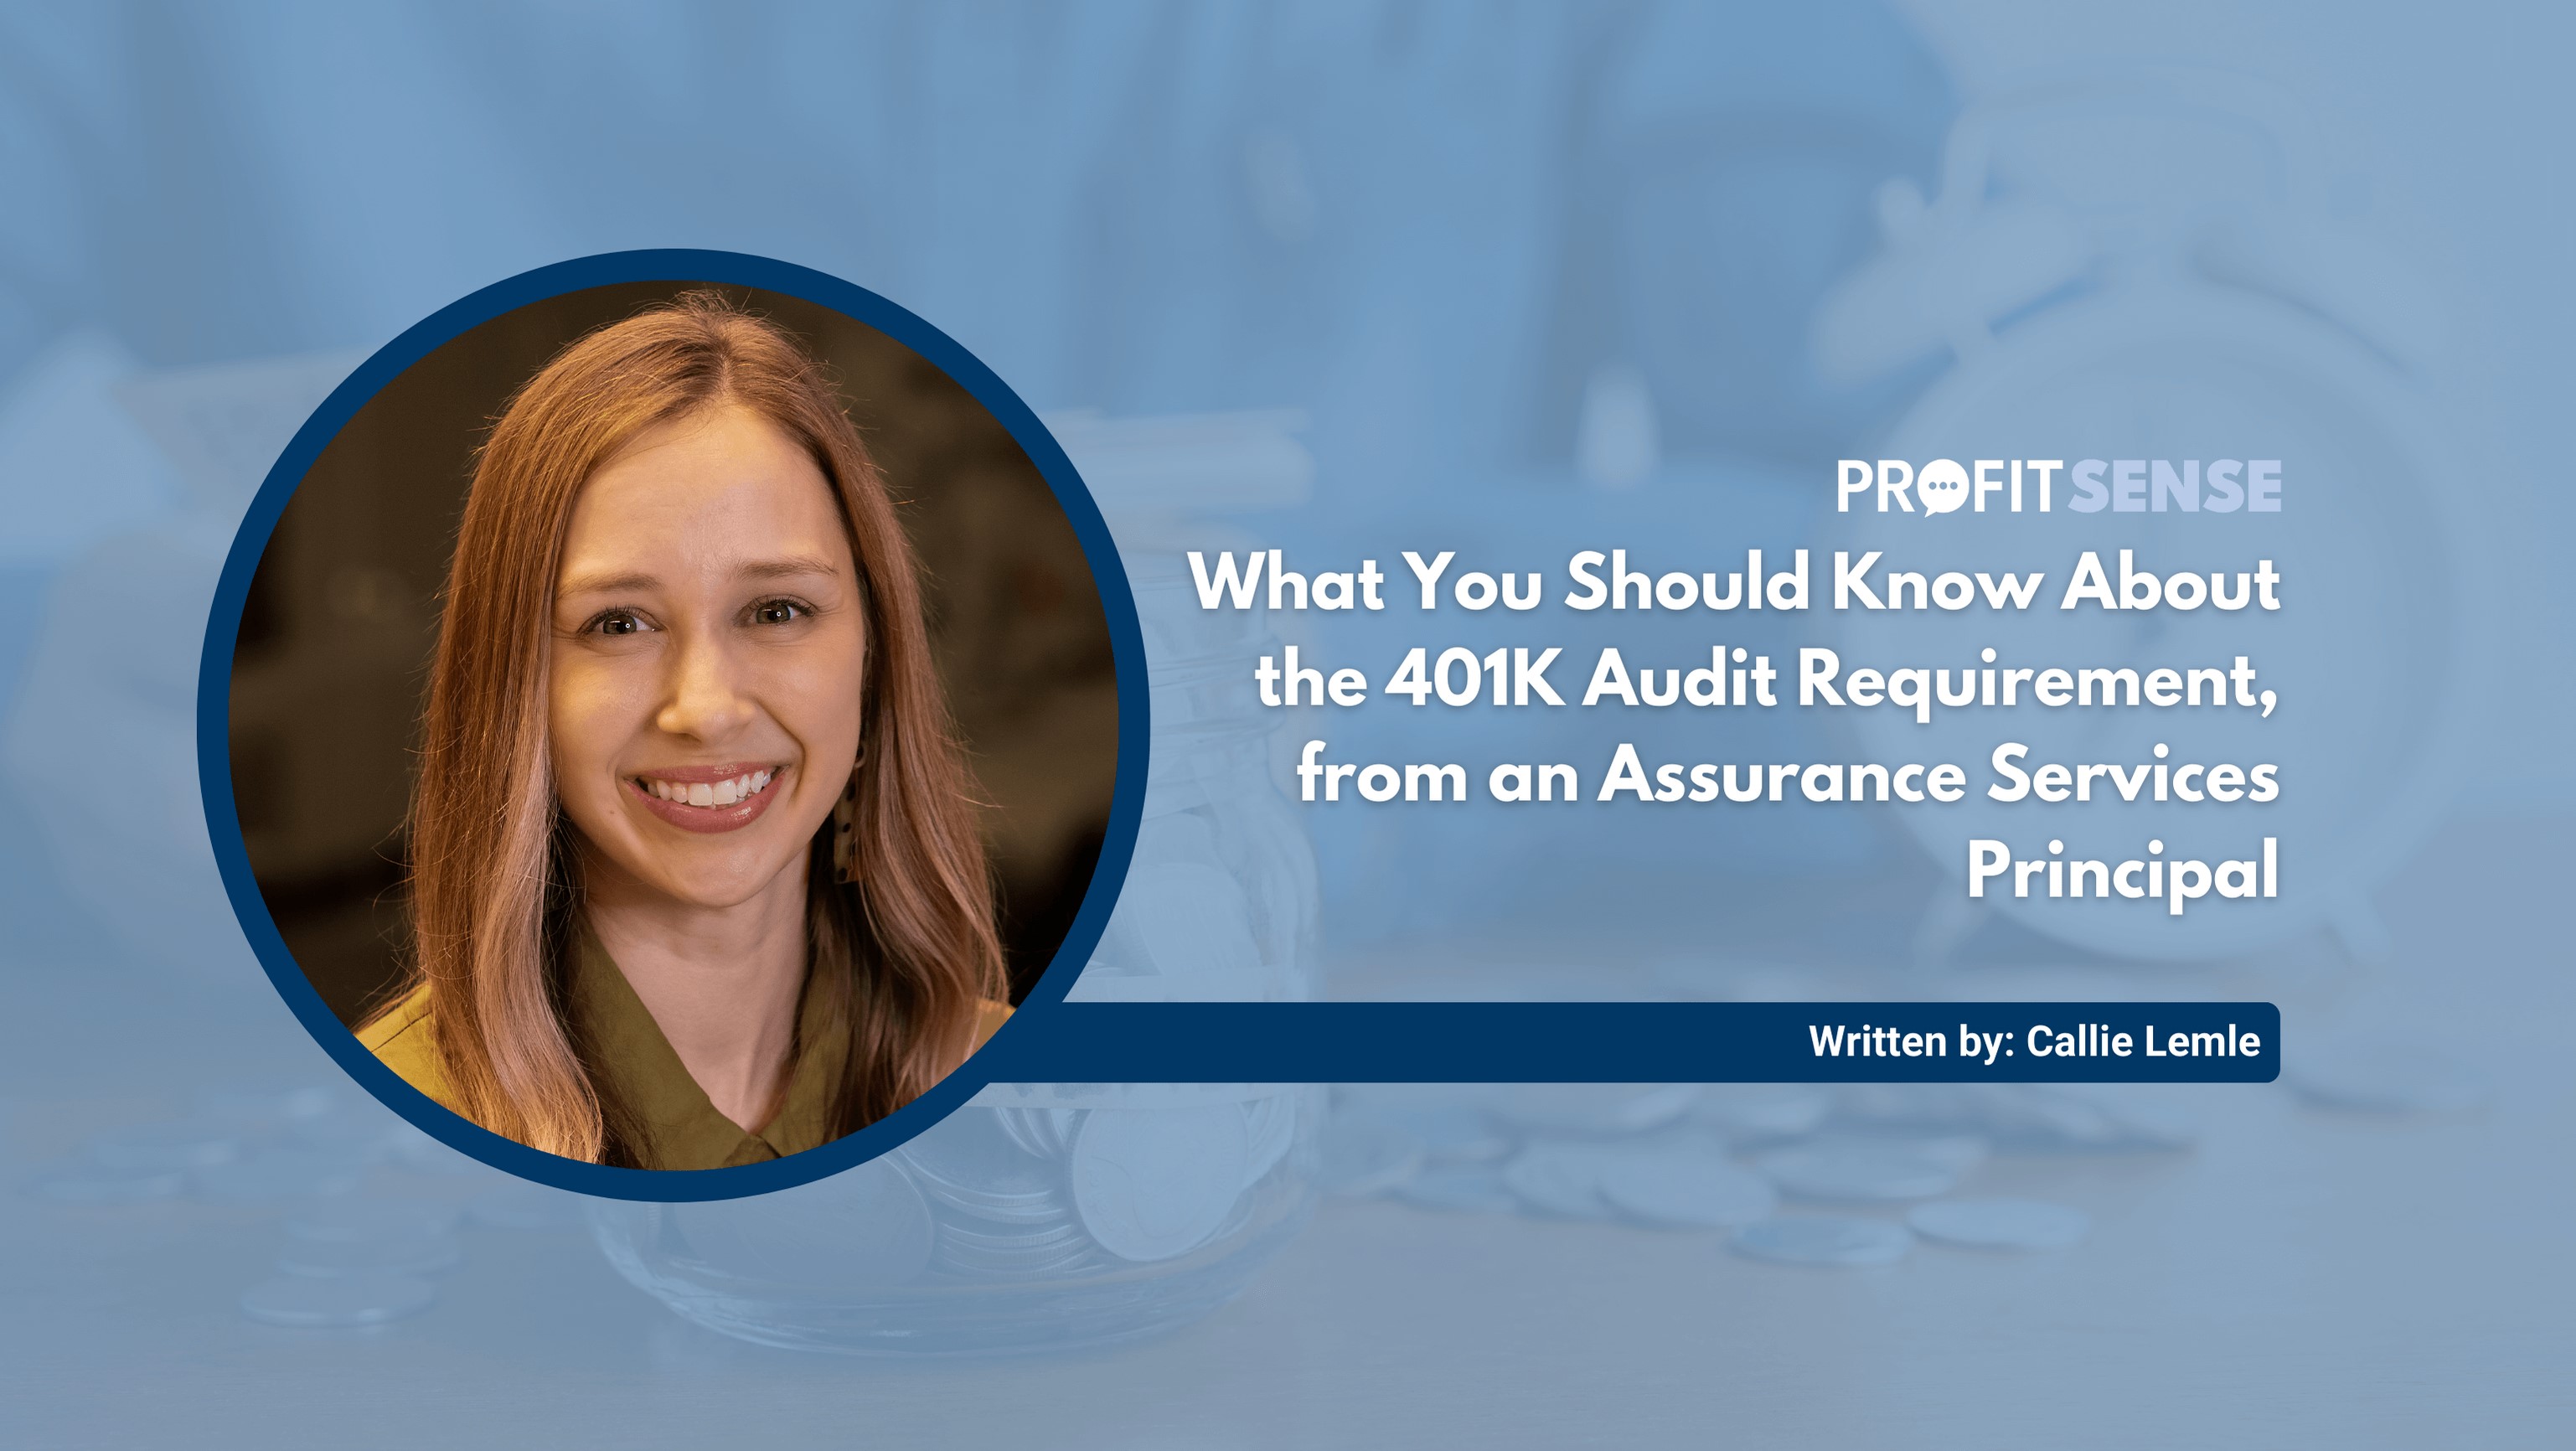 What You Should Know About the 401K Audit Requirement, from an Assurance Services Principal